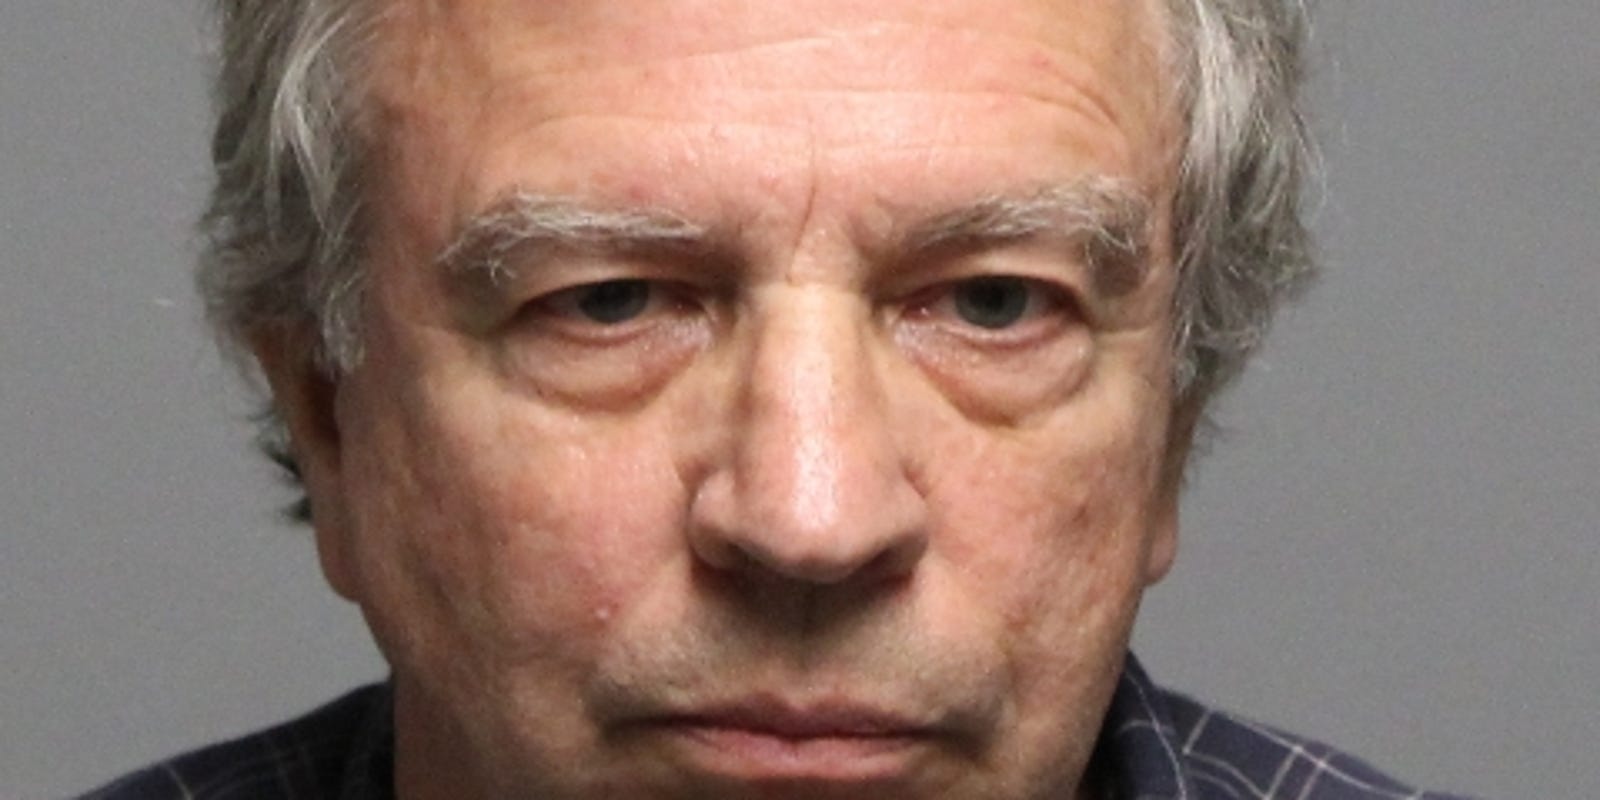 Guy Porn Arrest - Hunterdon County NJ man, 70, charged with child porn possession